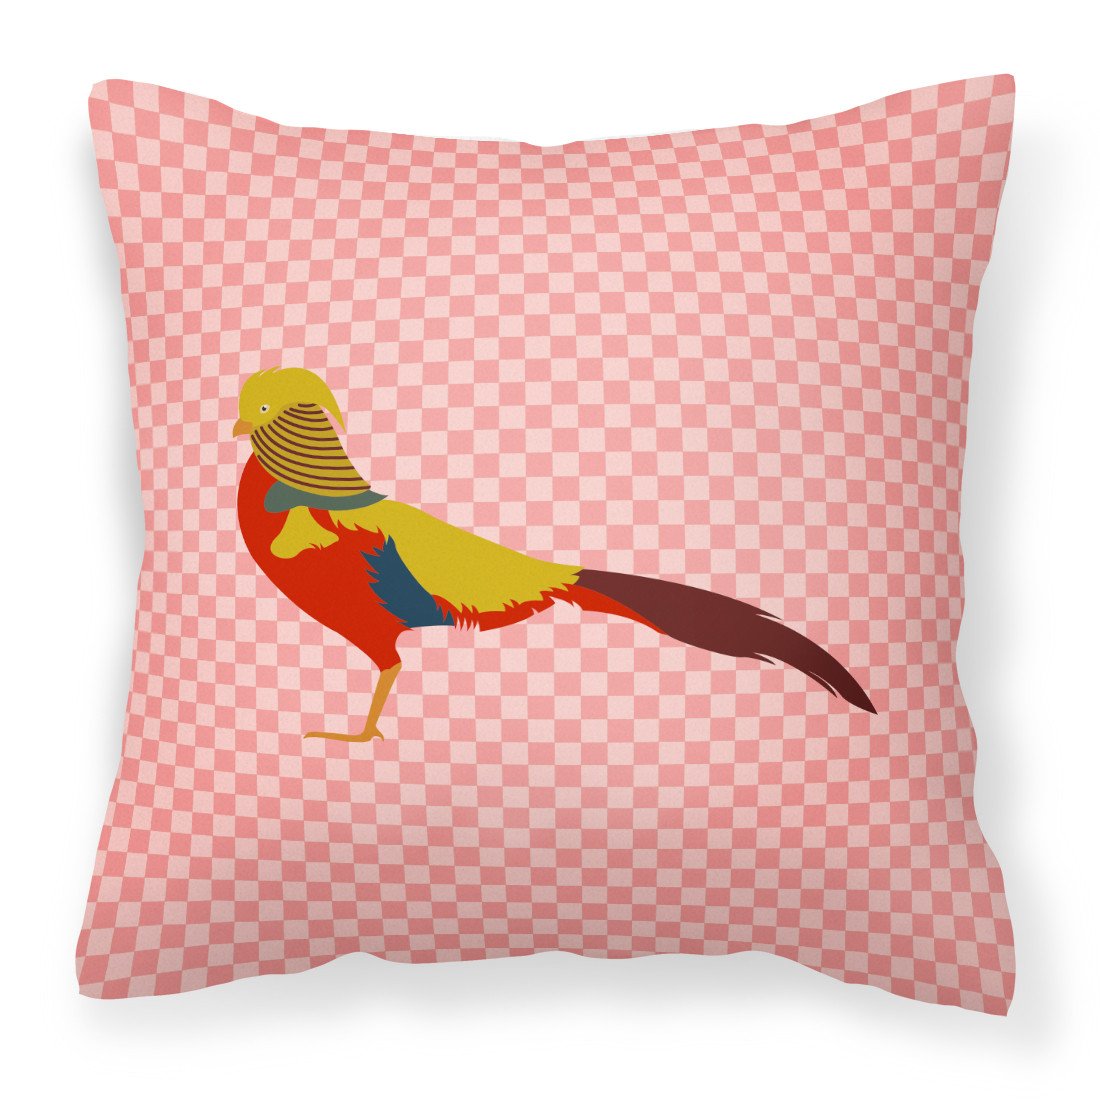 Golden or Chinese Pheasant Pink Check Fabric Decorative Pillow BB7928PW1818 by Caroline's Treasures